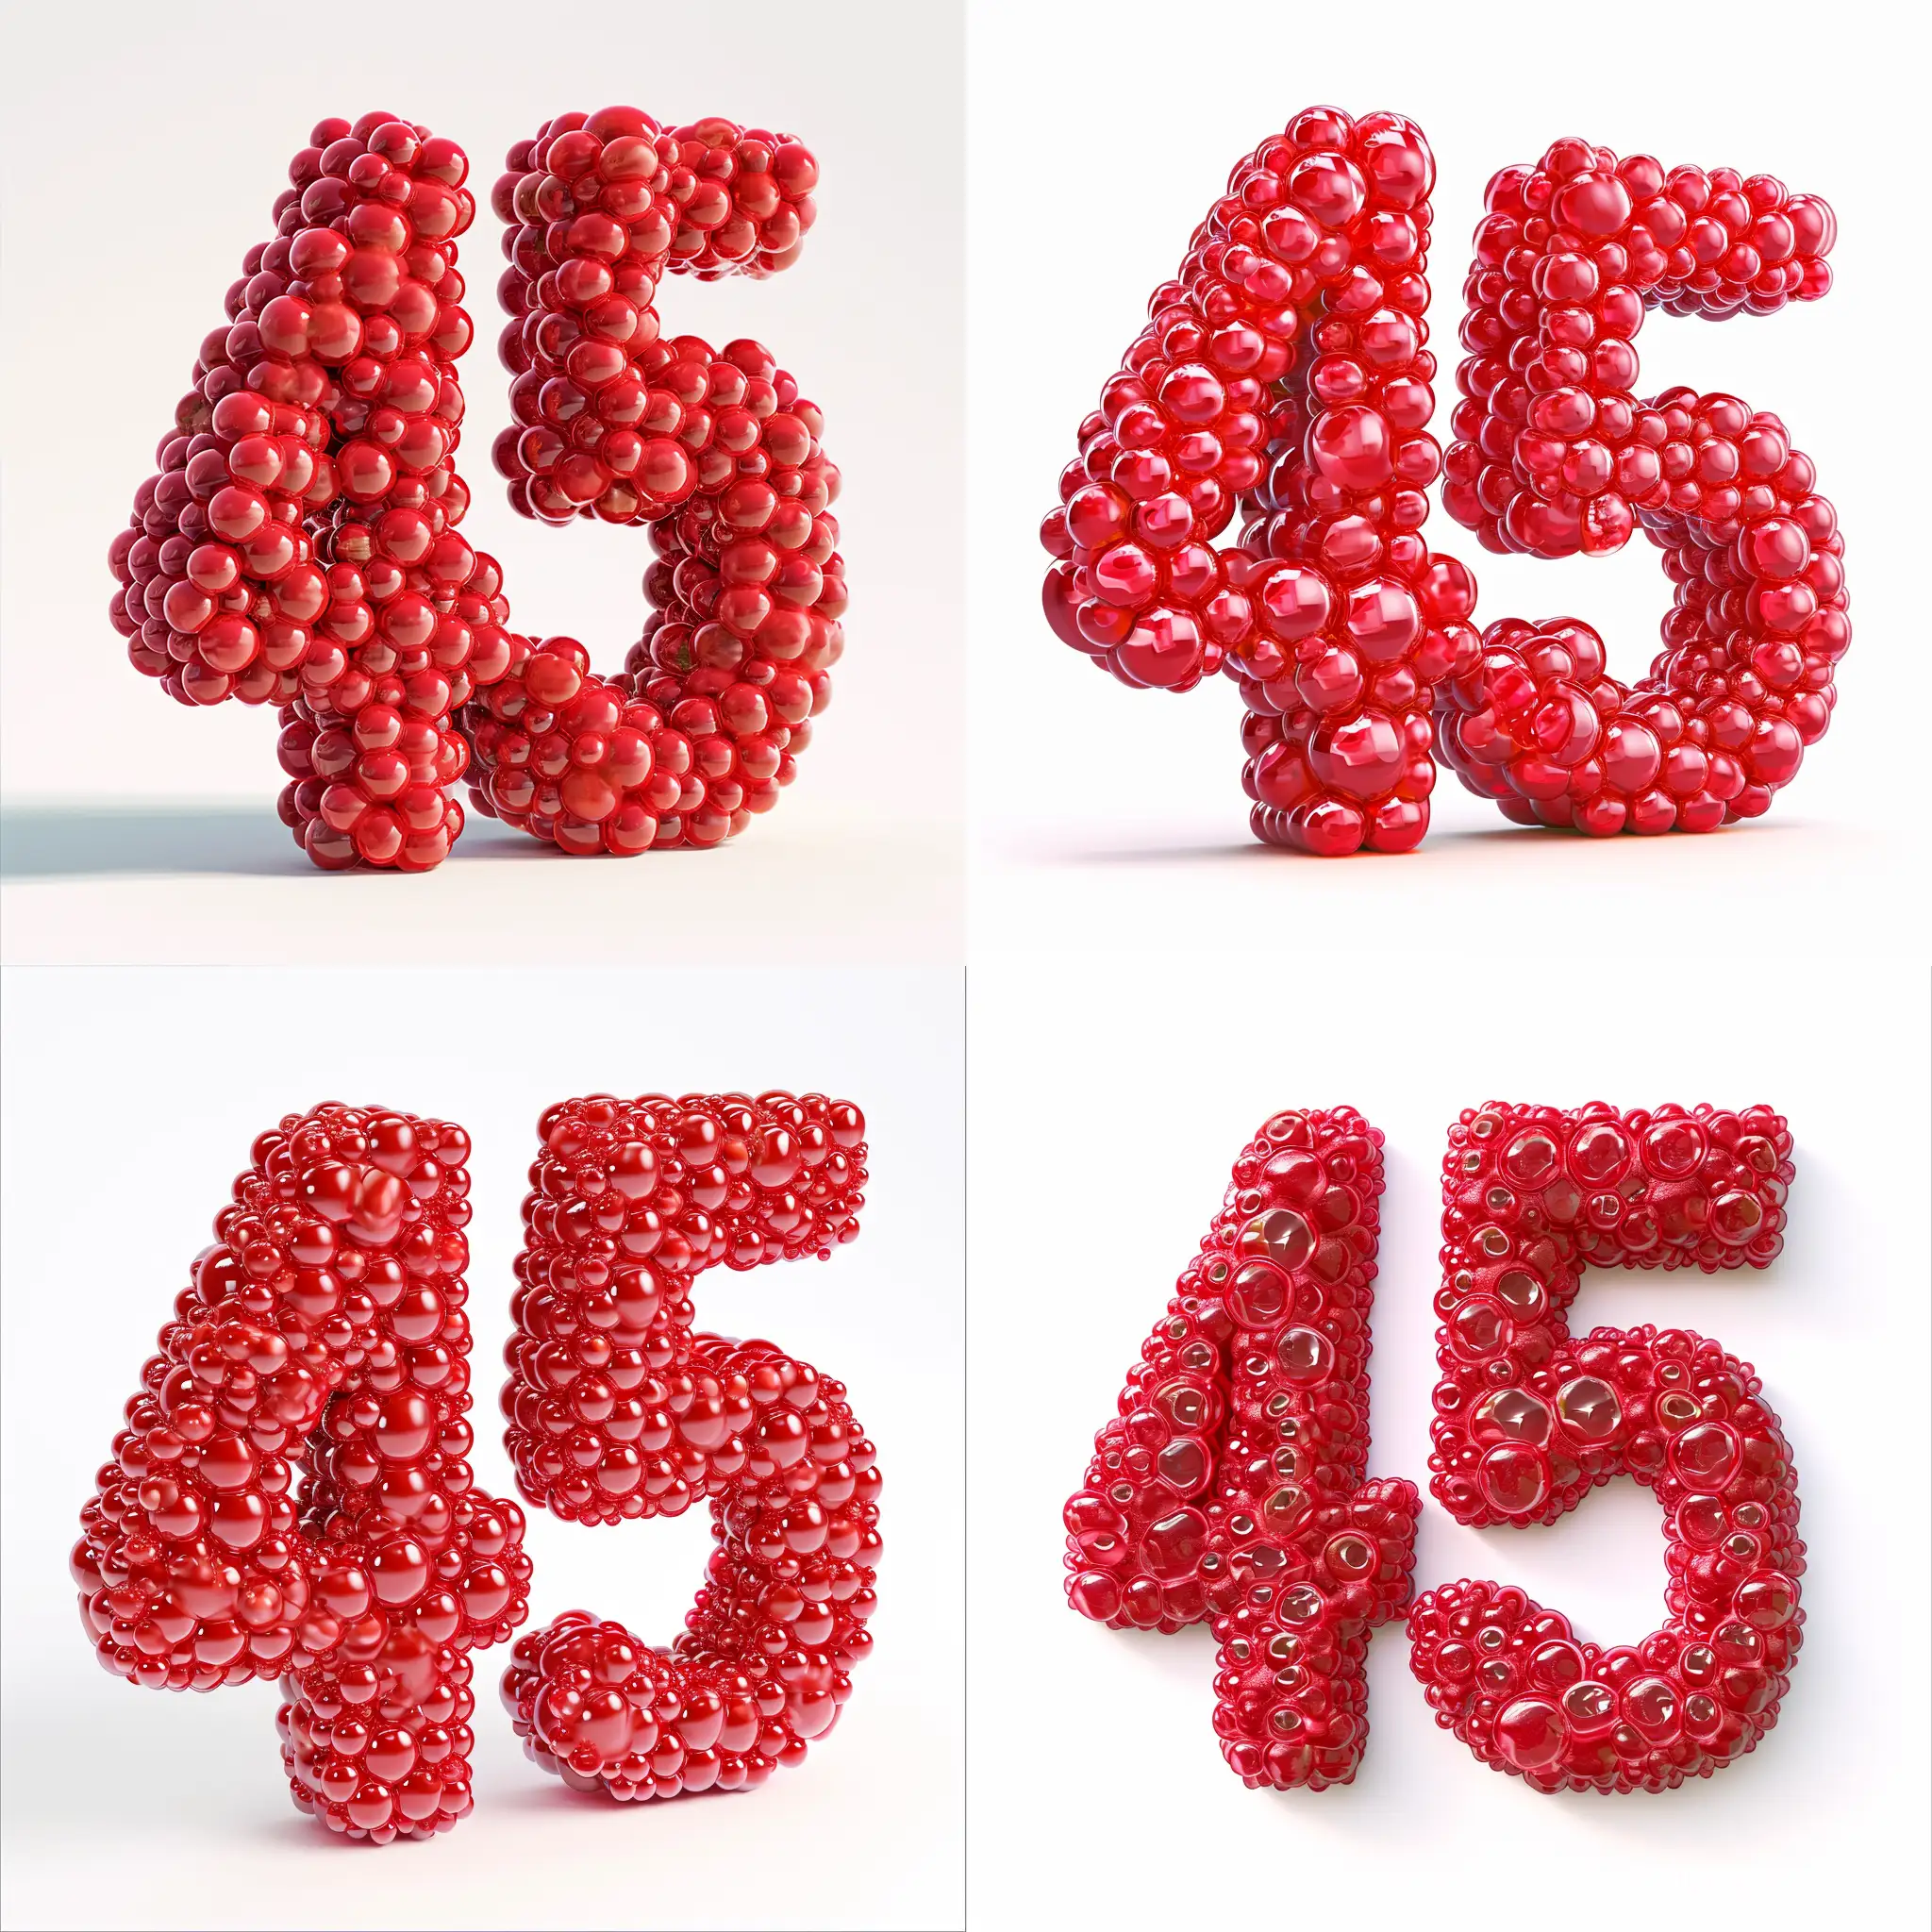 Vibrant-Red-Number-45-with-RaspberryLike-Bubbles-on-White-Background